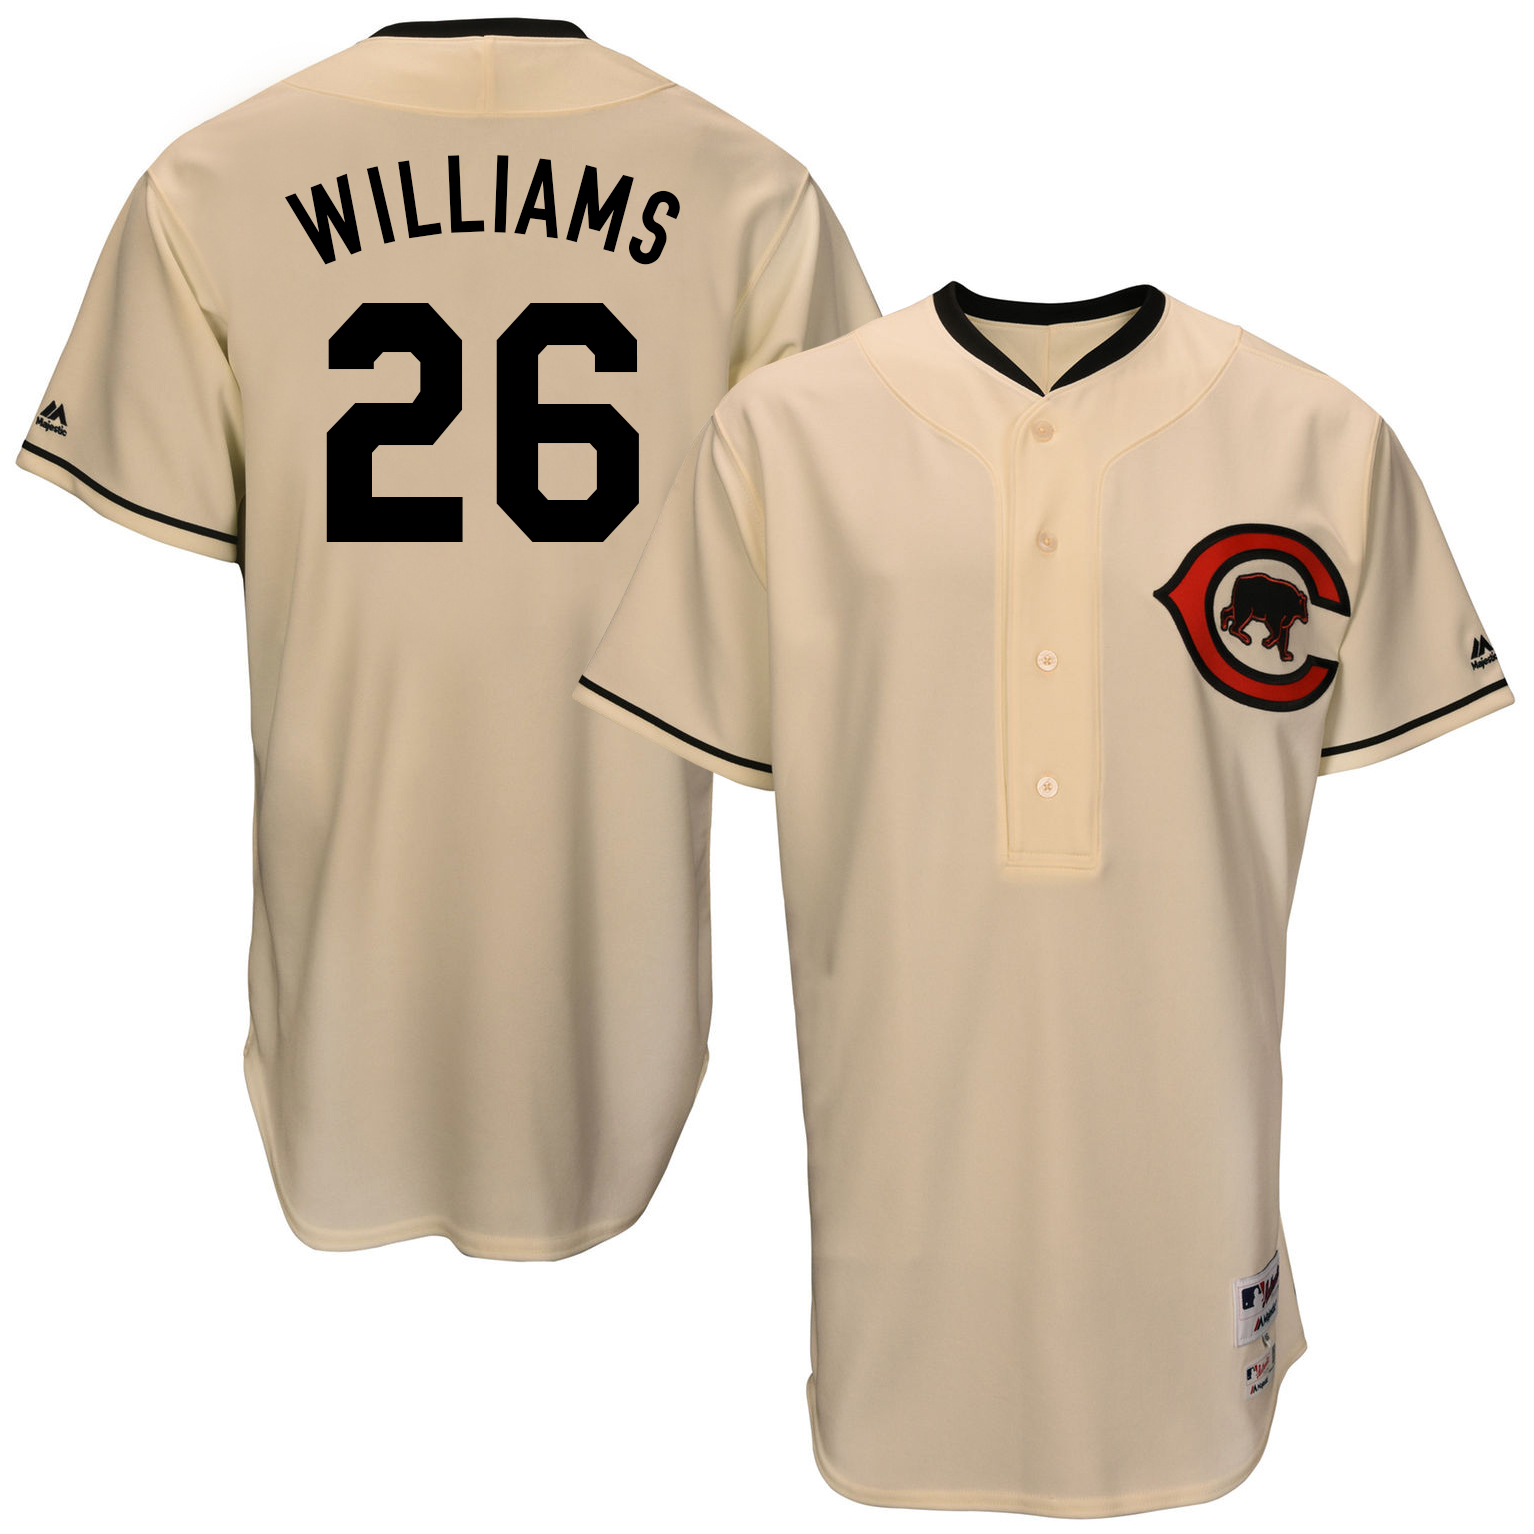 Cubs 26 Billy Williams Cream Throwback Jersey